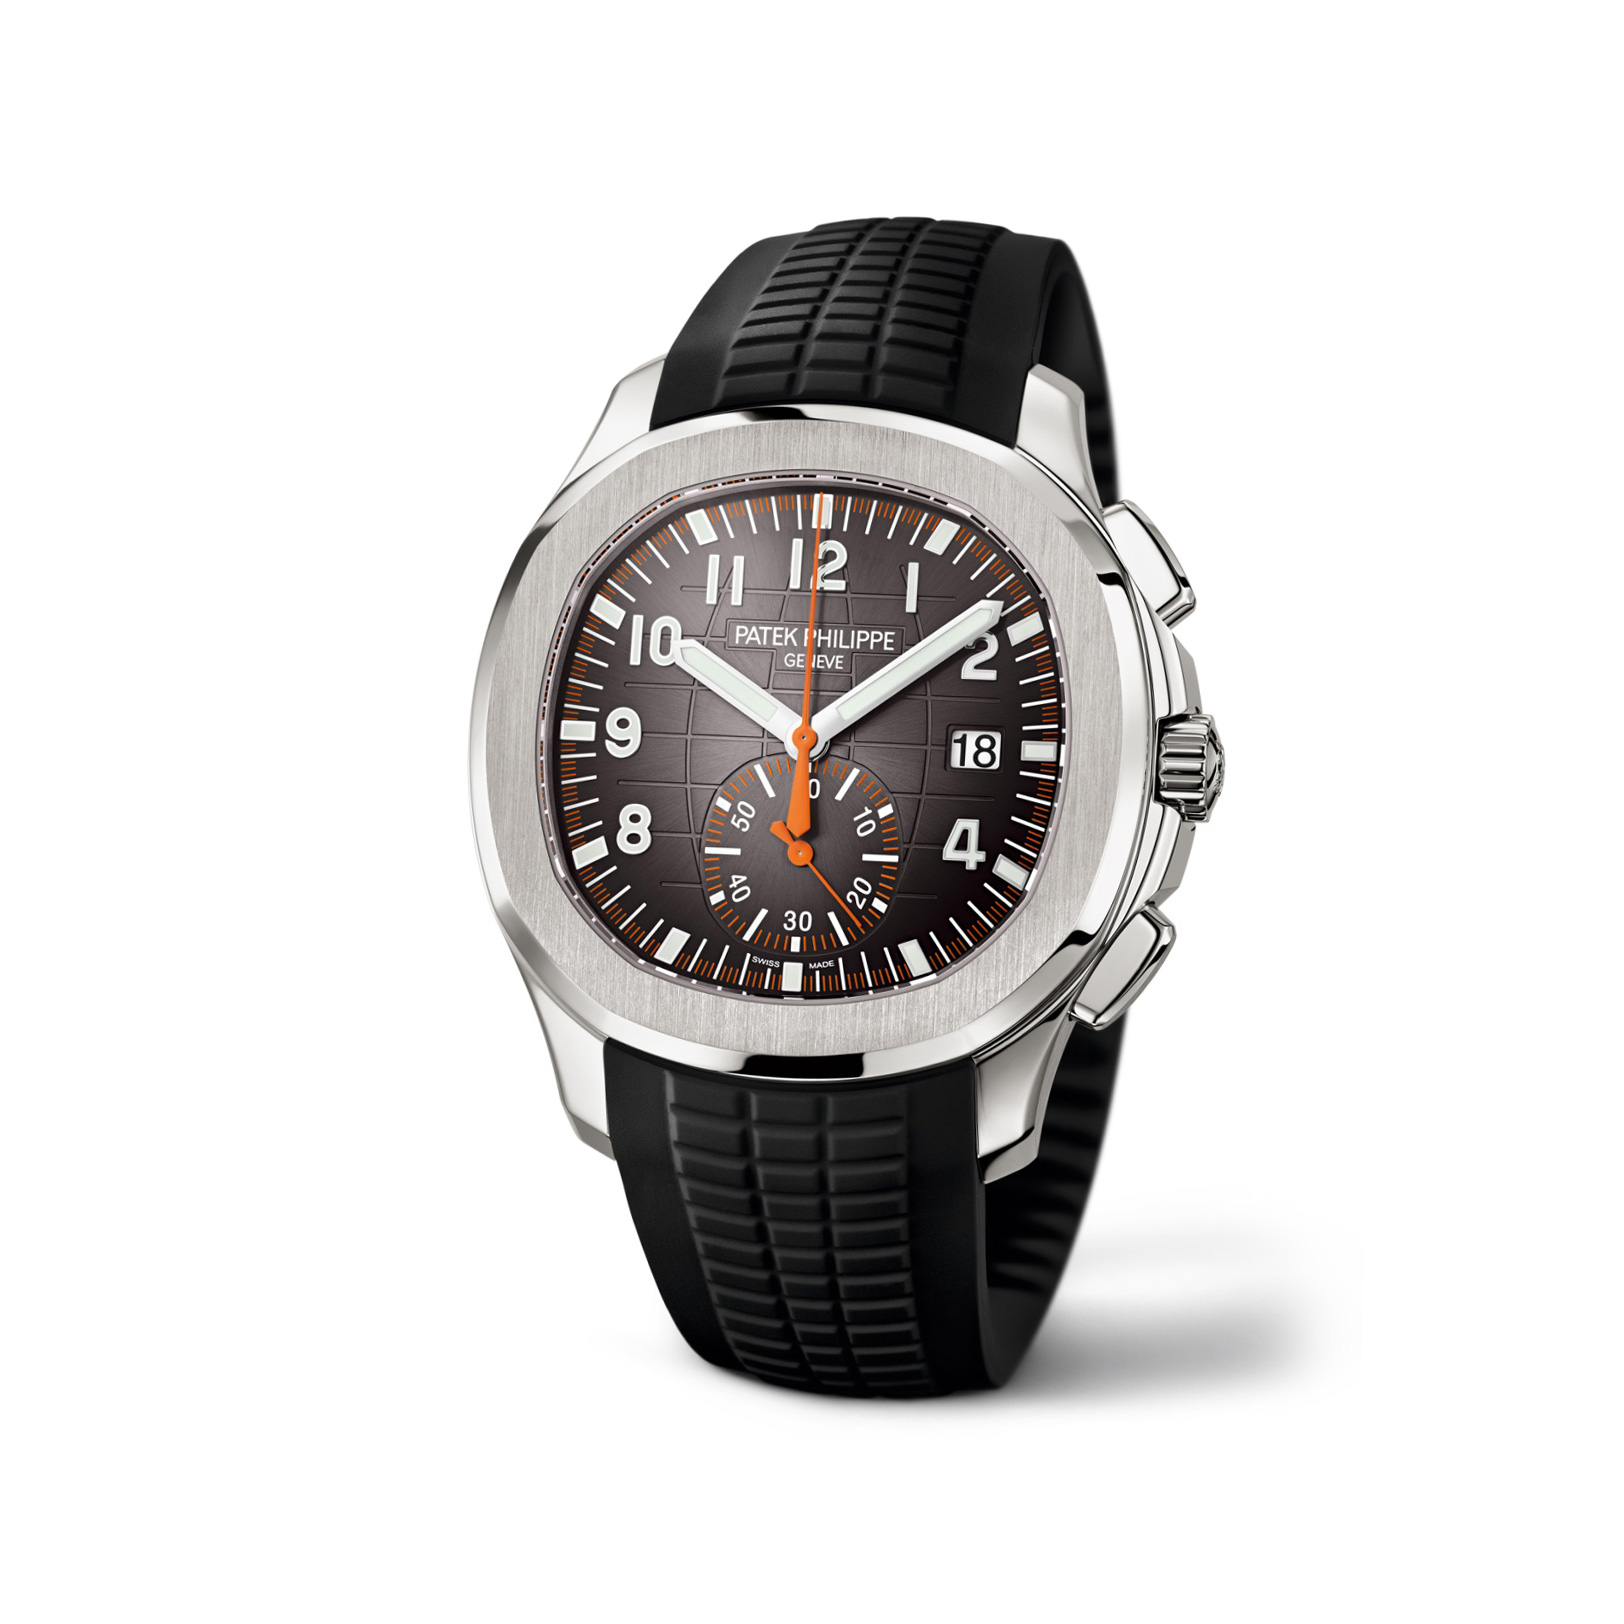 Aquanaut Chronograph Stainless Steel gallery 5